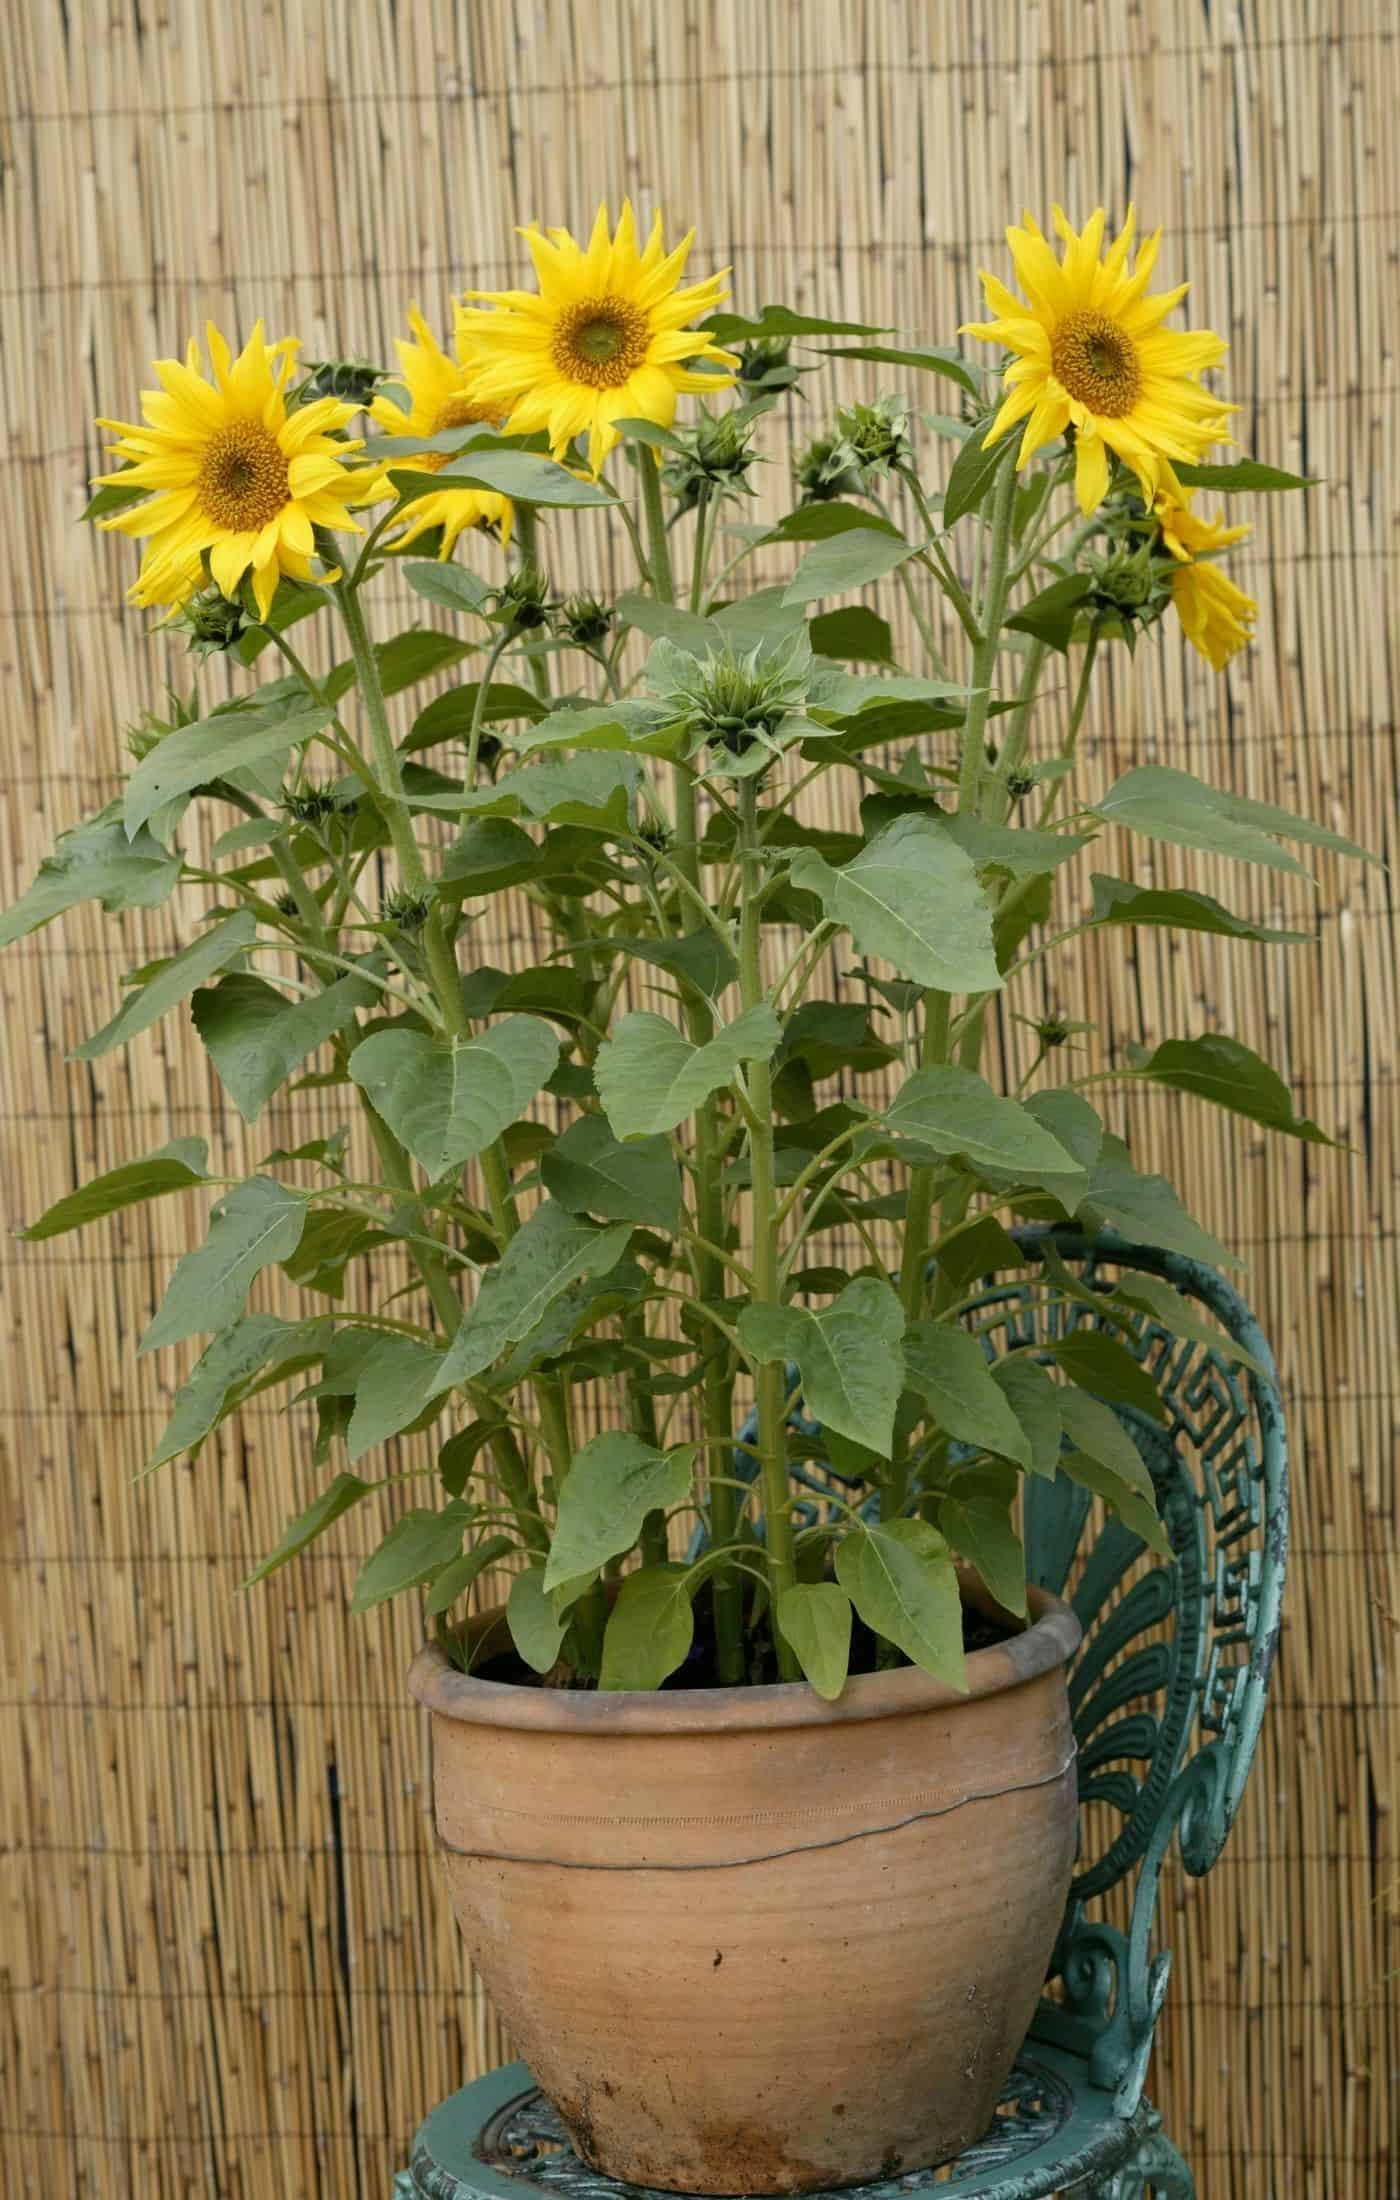 Sunflowers growing in a planter pot